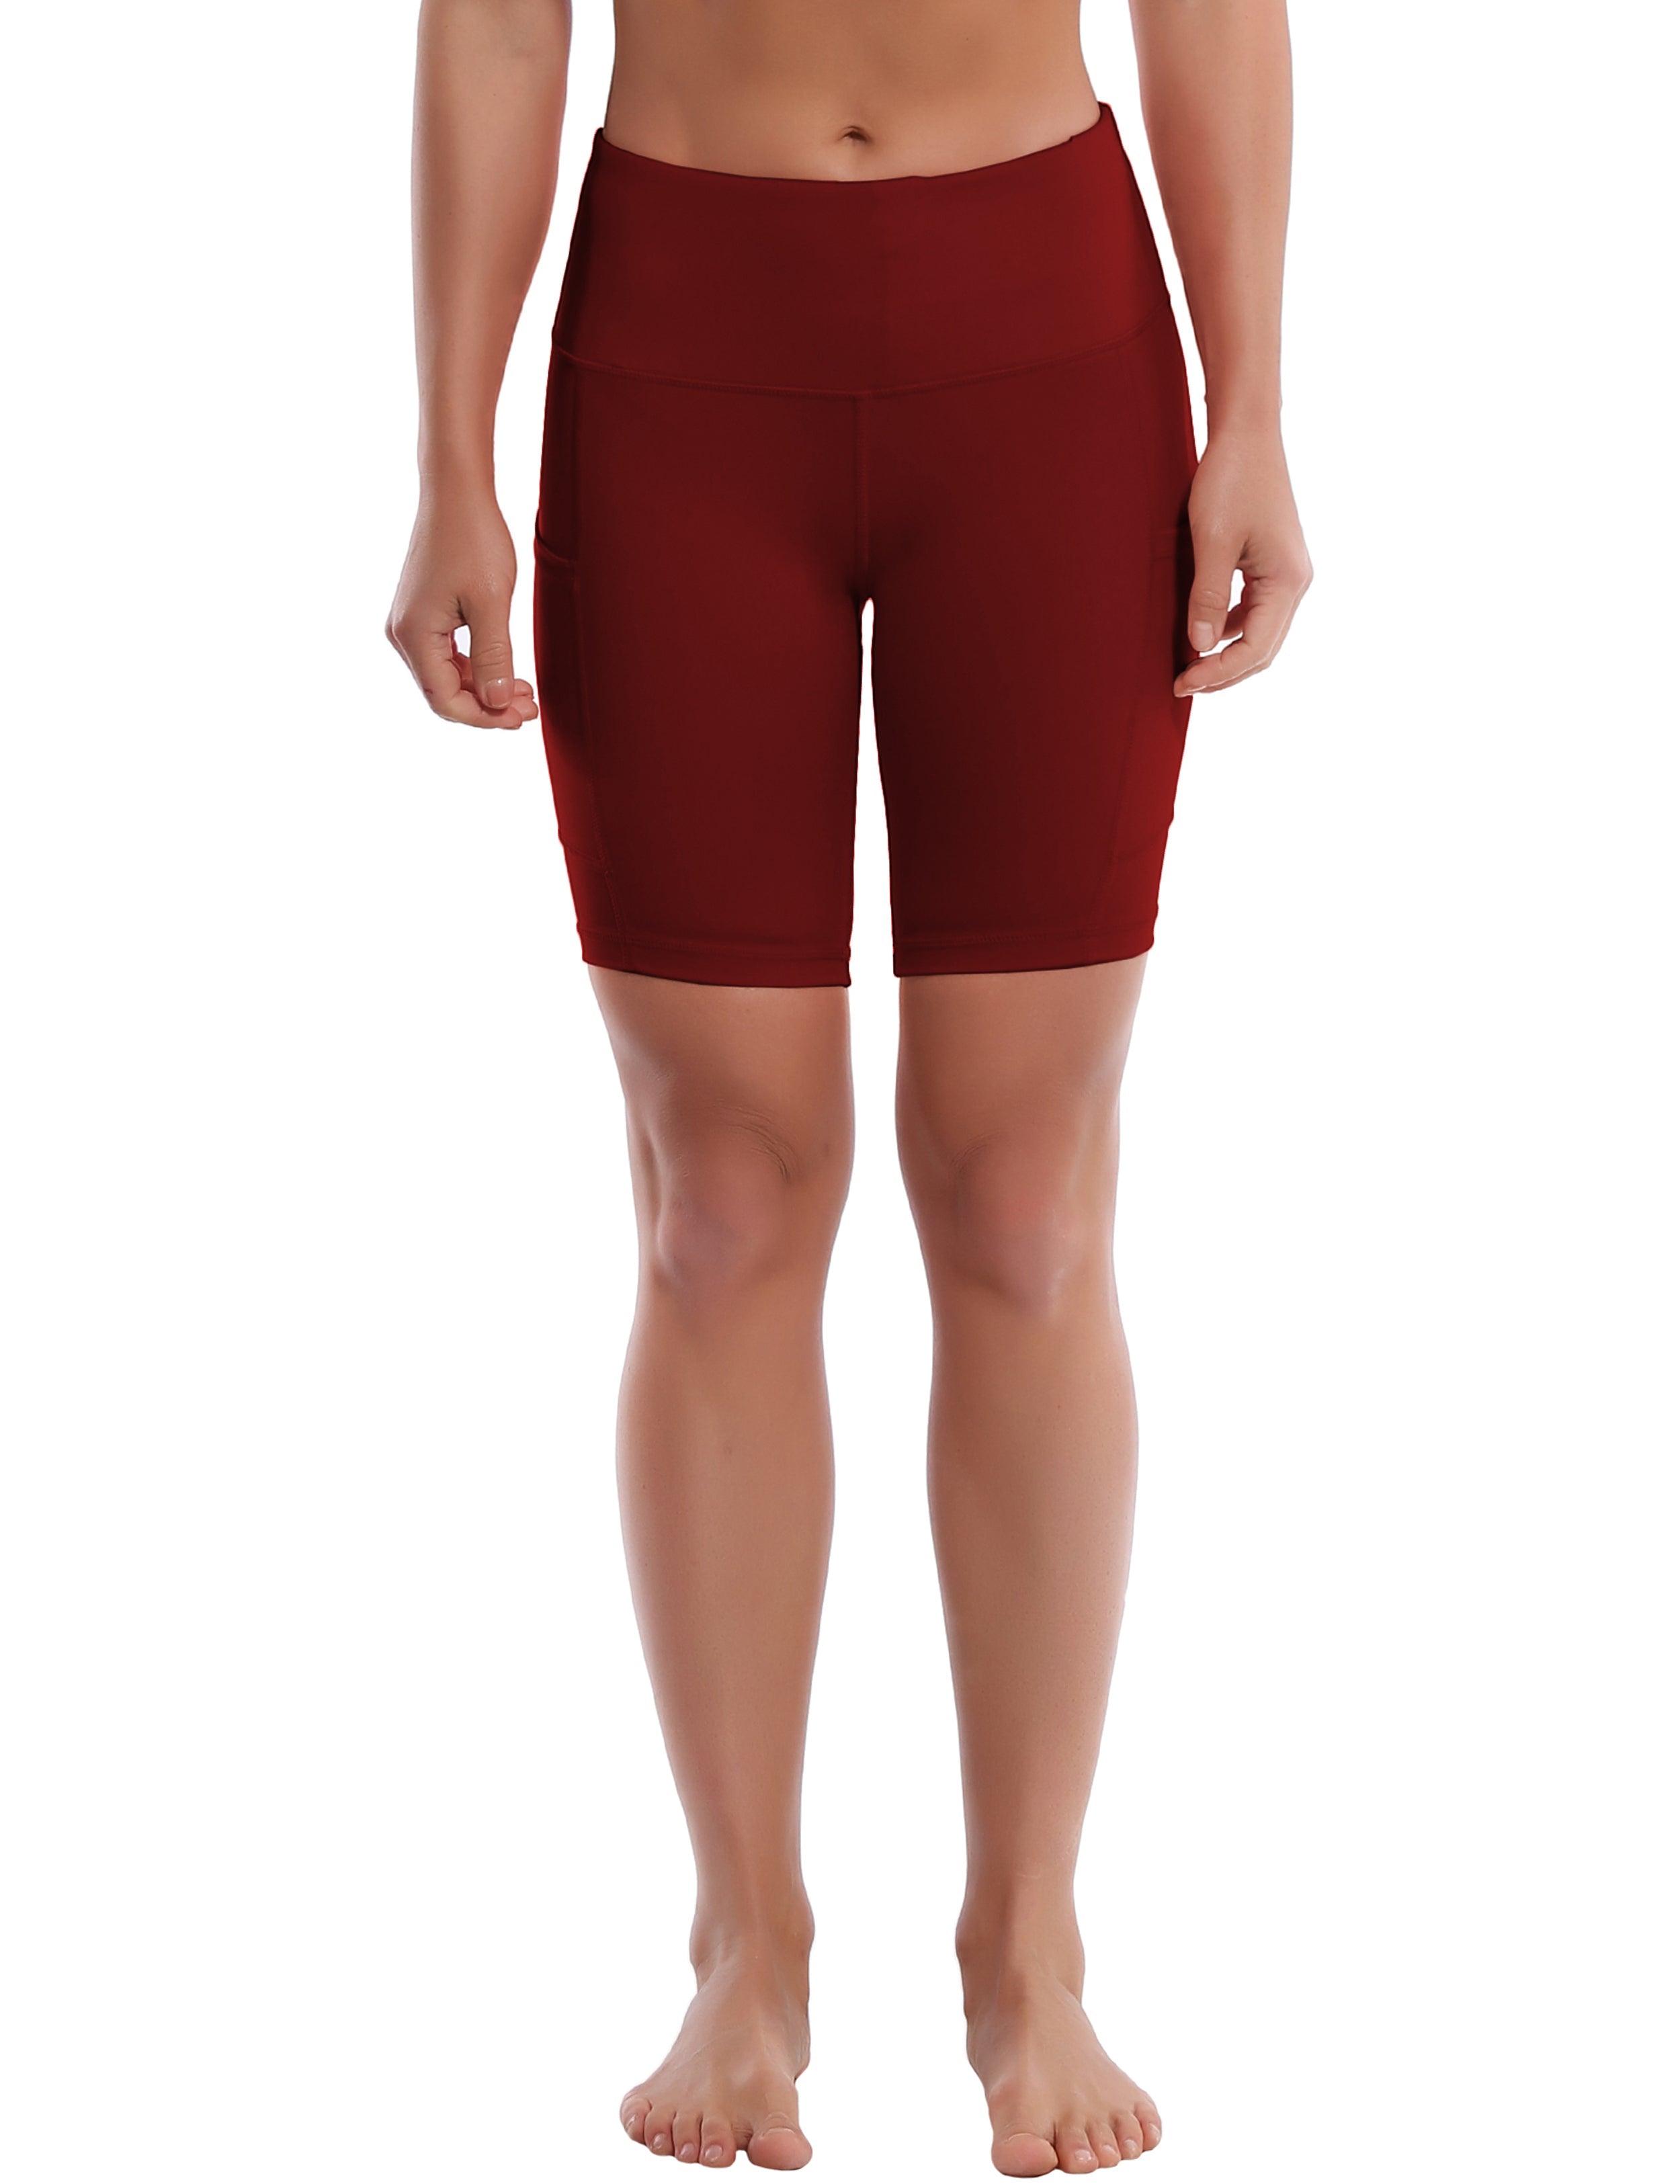 8" Side Pockets yogastudio Shorts cherryred Sleek, soft, smooth and totally comfortable: our newest style is here. Softest-ever fabric High elasticity High density 4-way stretch Fabric doesn't attract lint easily No see-through Moisture-wicking Machine wash 75% Nylon, 25% Spandex